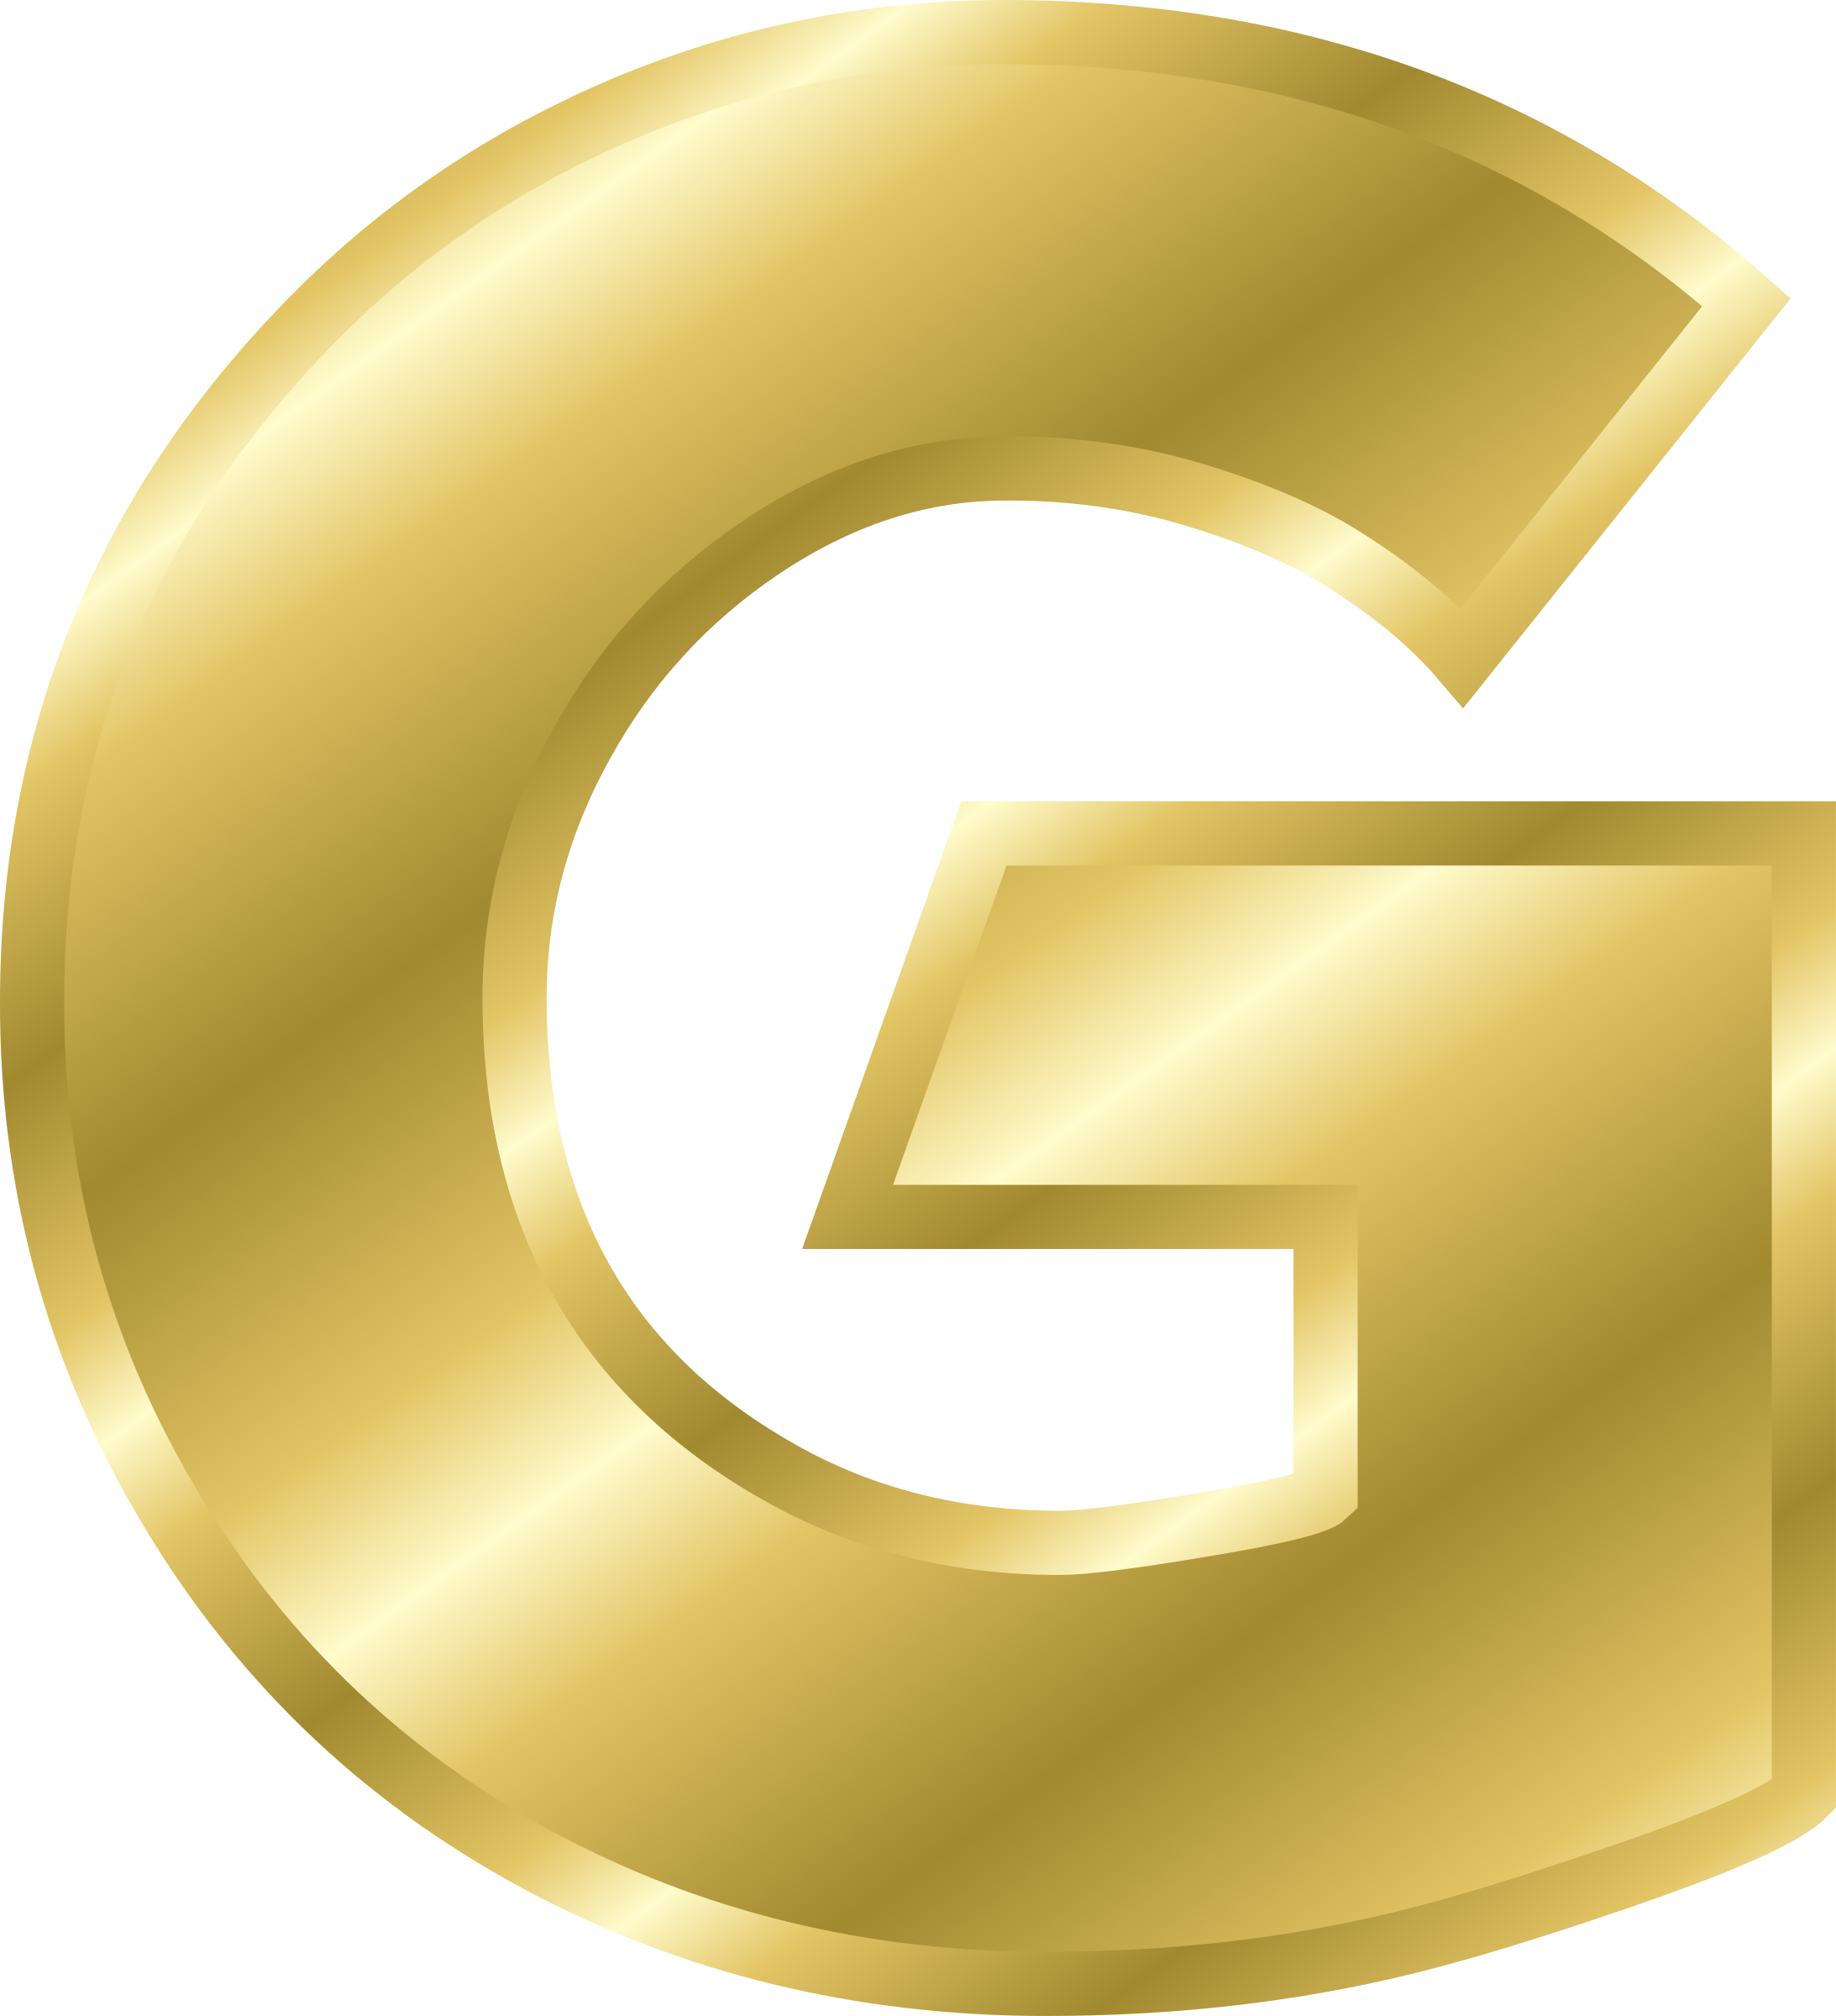 G Letter PNG Image HD